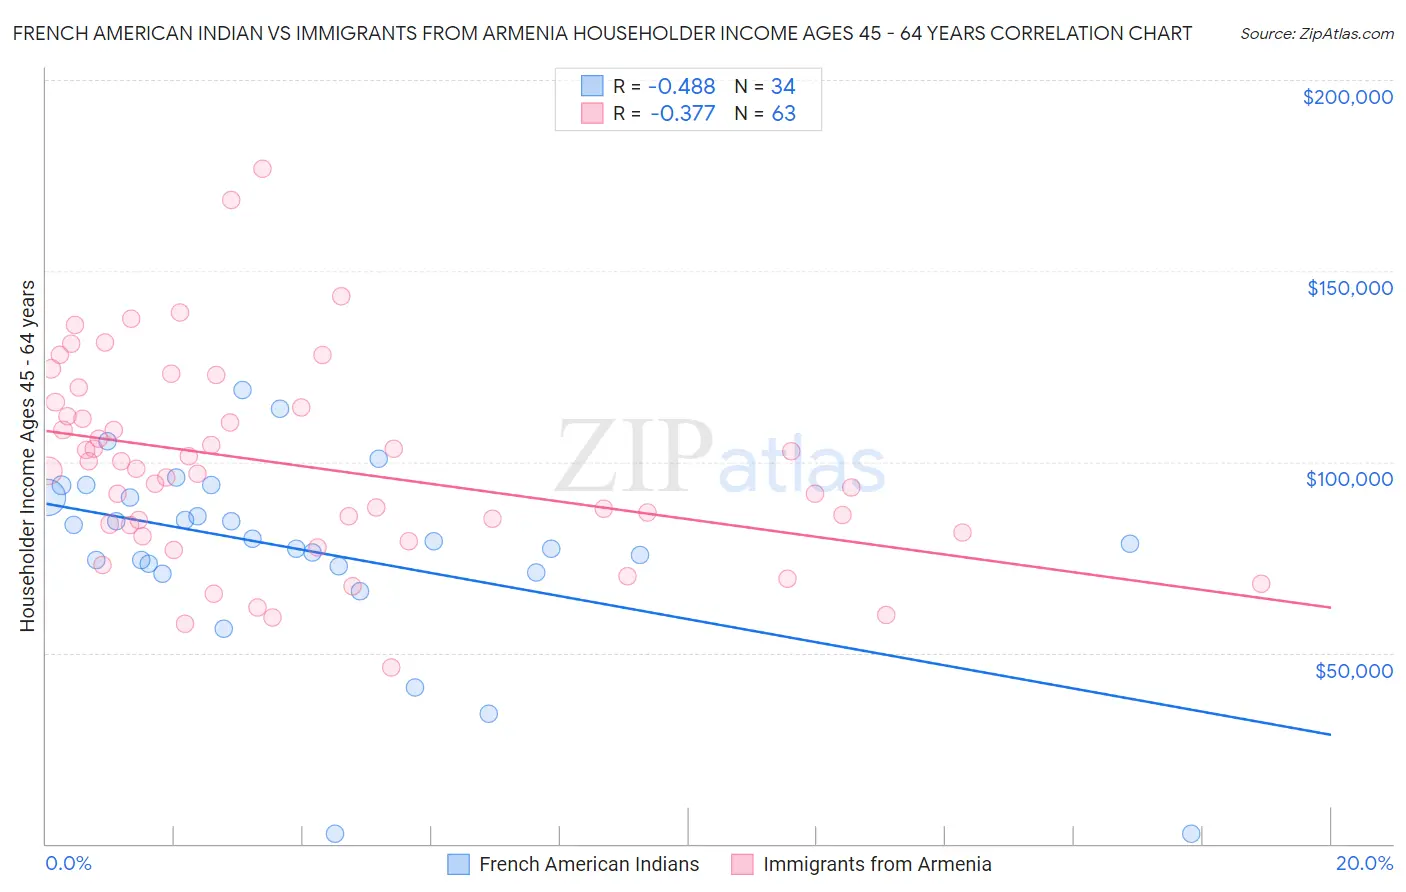 French American Indian vs Immigrants from Armenia Householder Income Ages 45 - 64 years